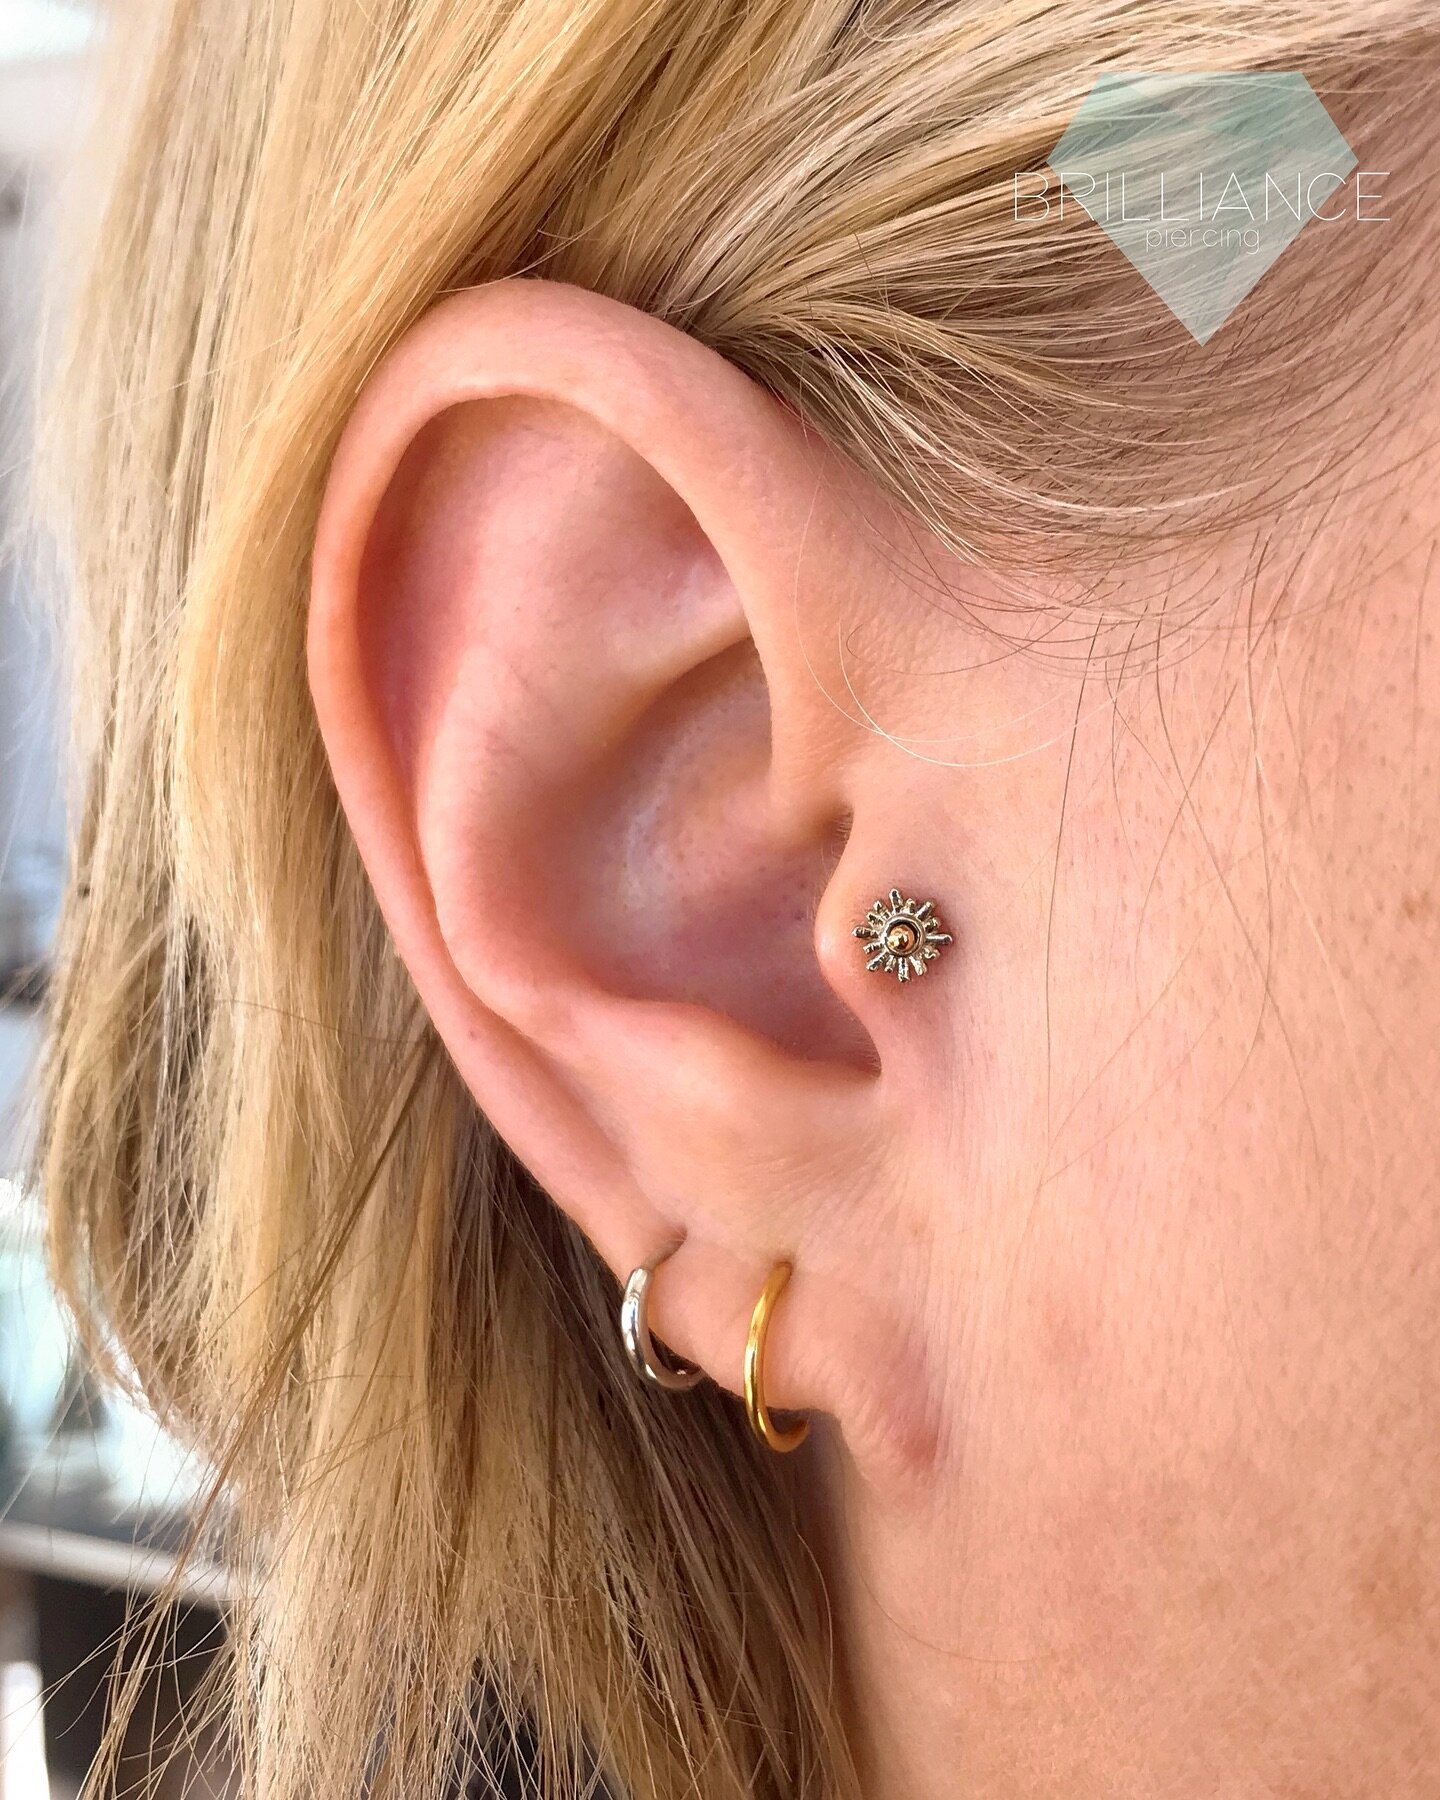 @jenkristoff brought some sunshine to this tragus with a touch of mixed metal magic! 🌞